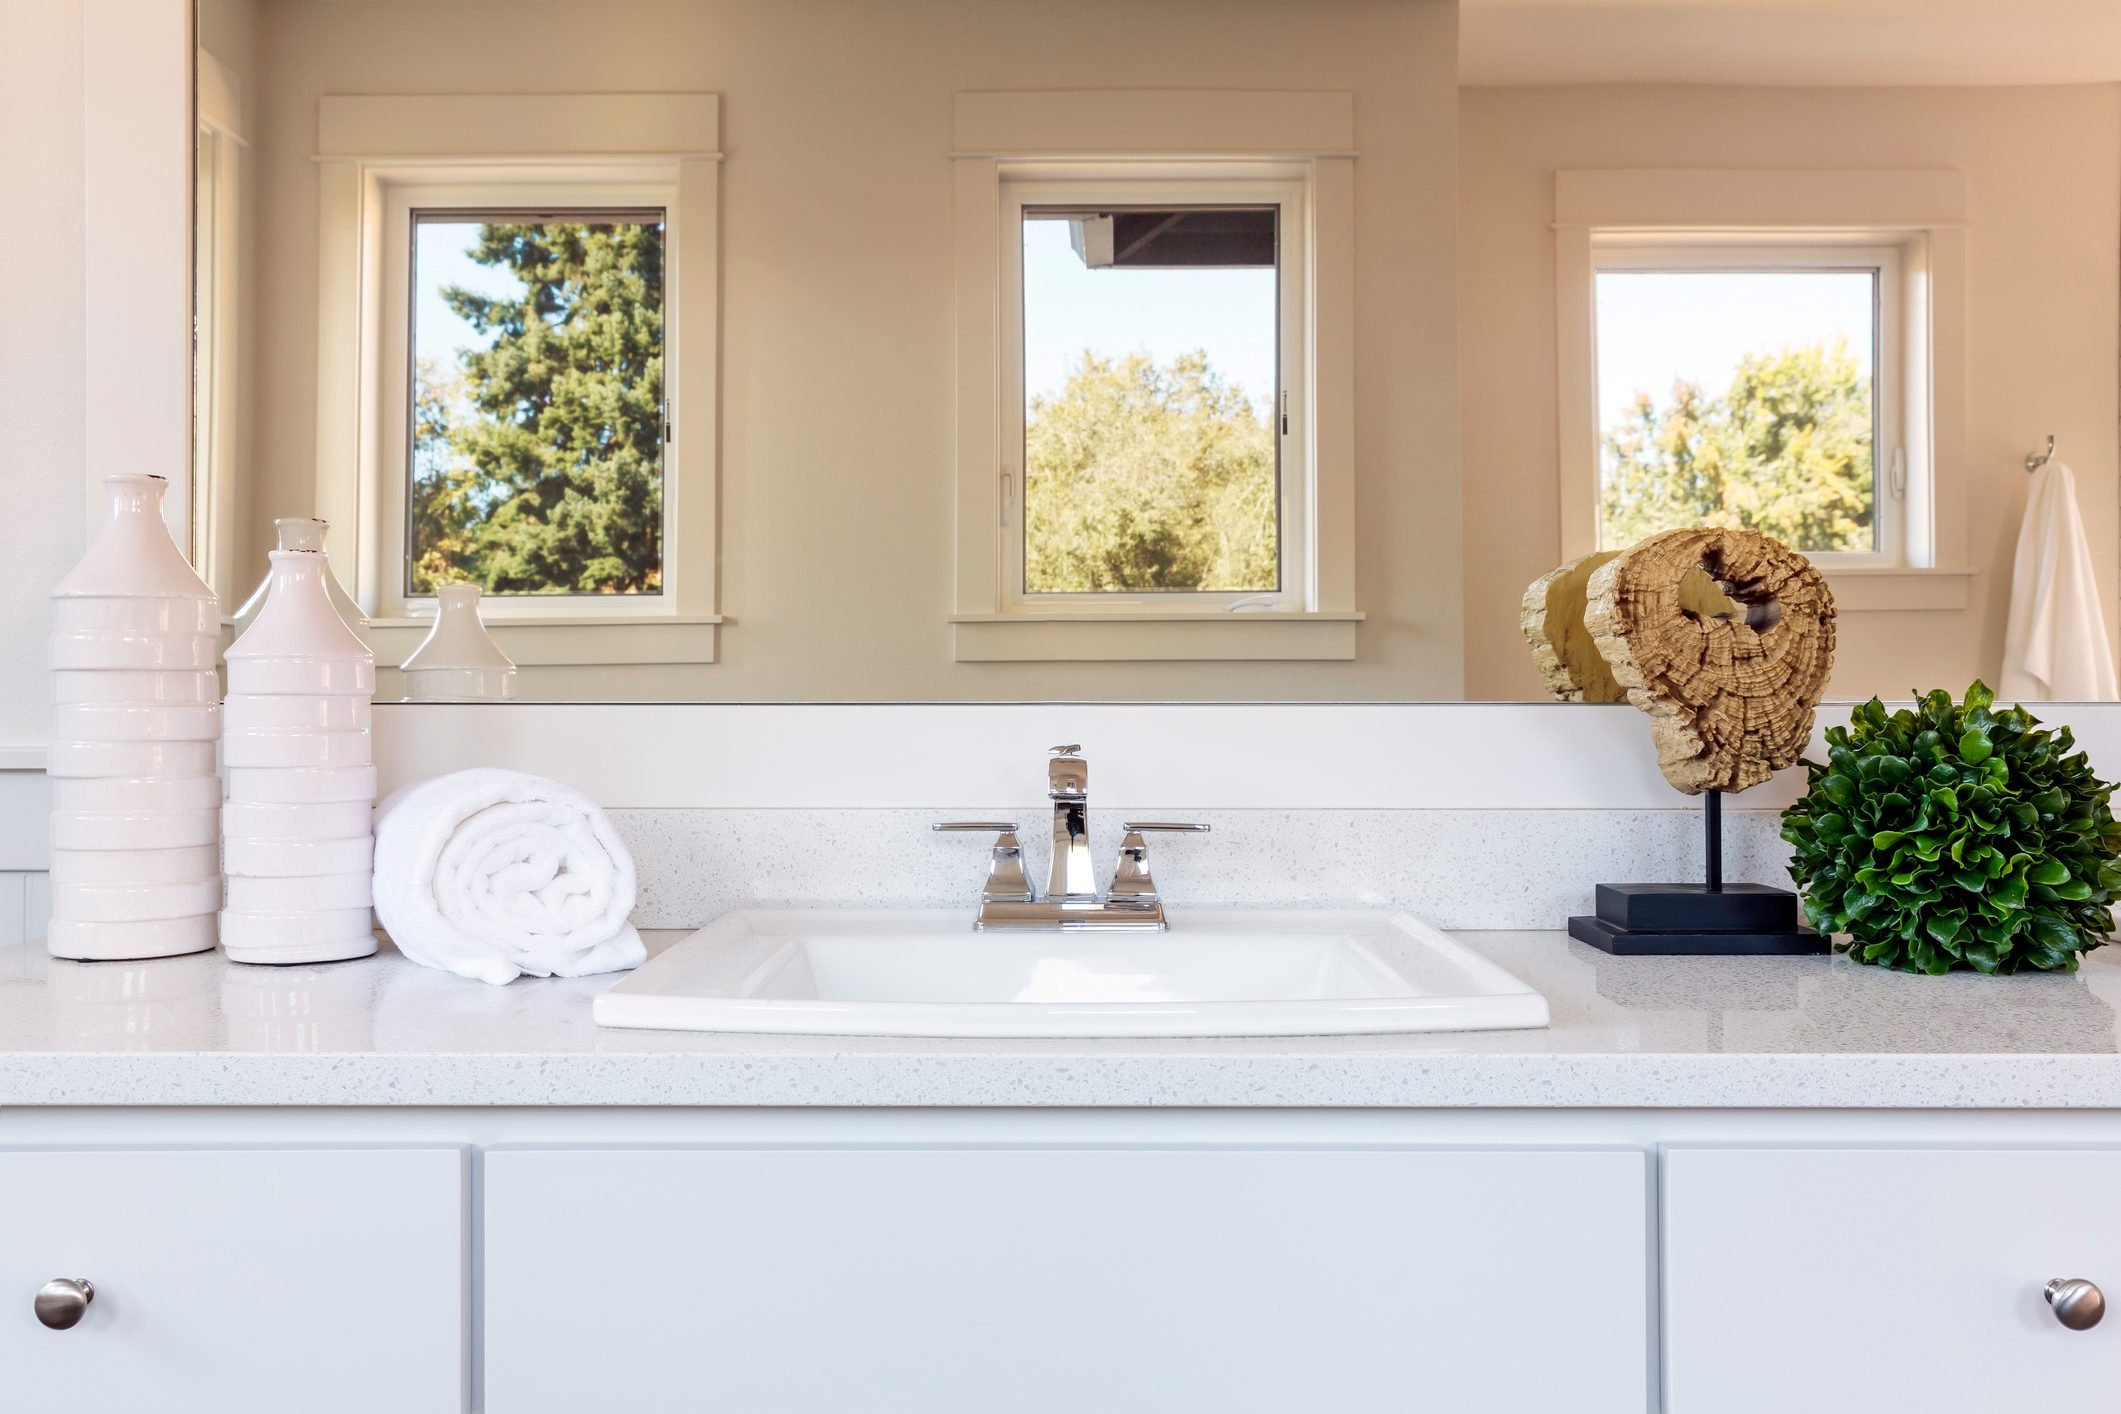 Homeowner's Guide To Drop-In Bathroom Sinks | The Family Handyman